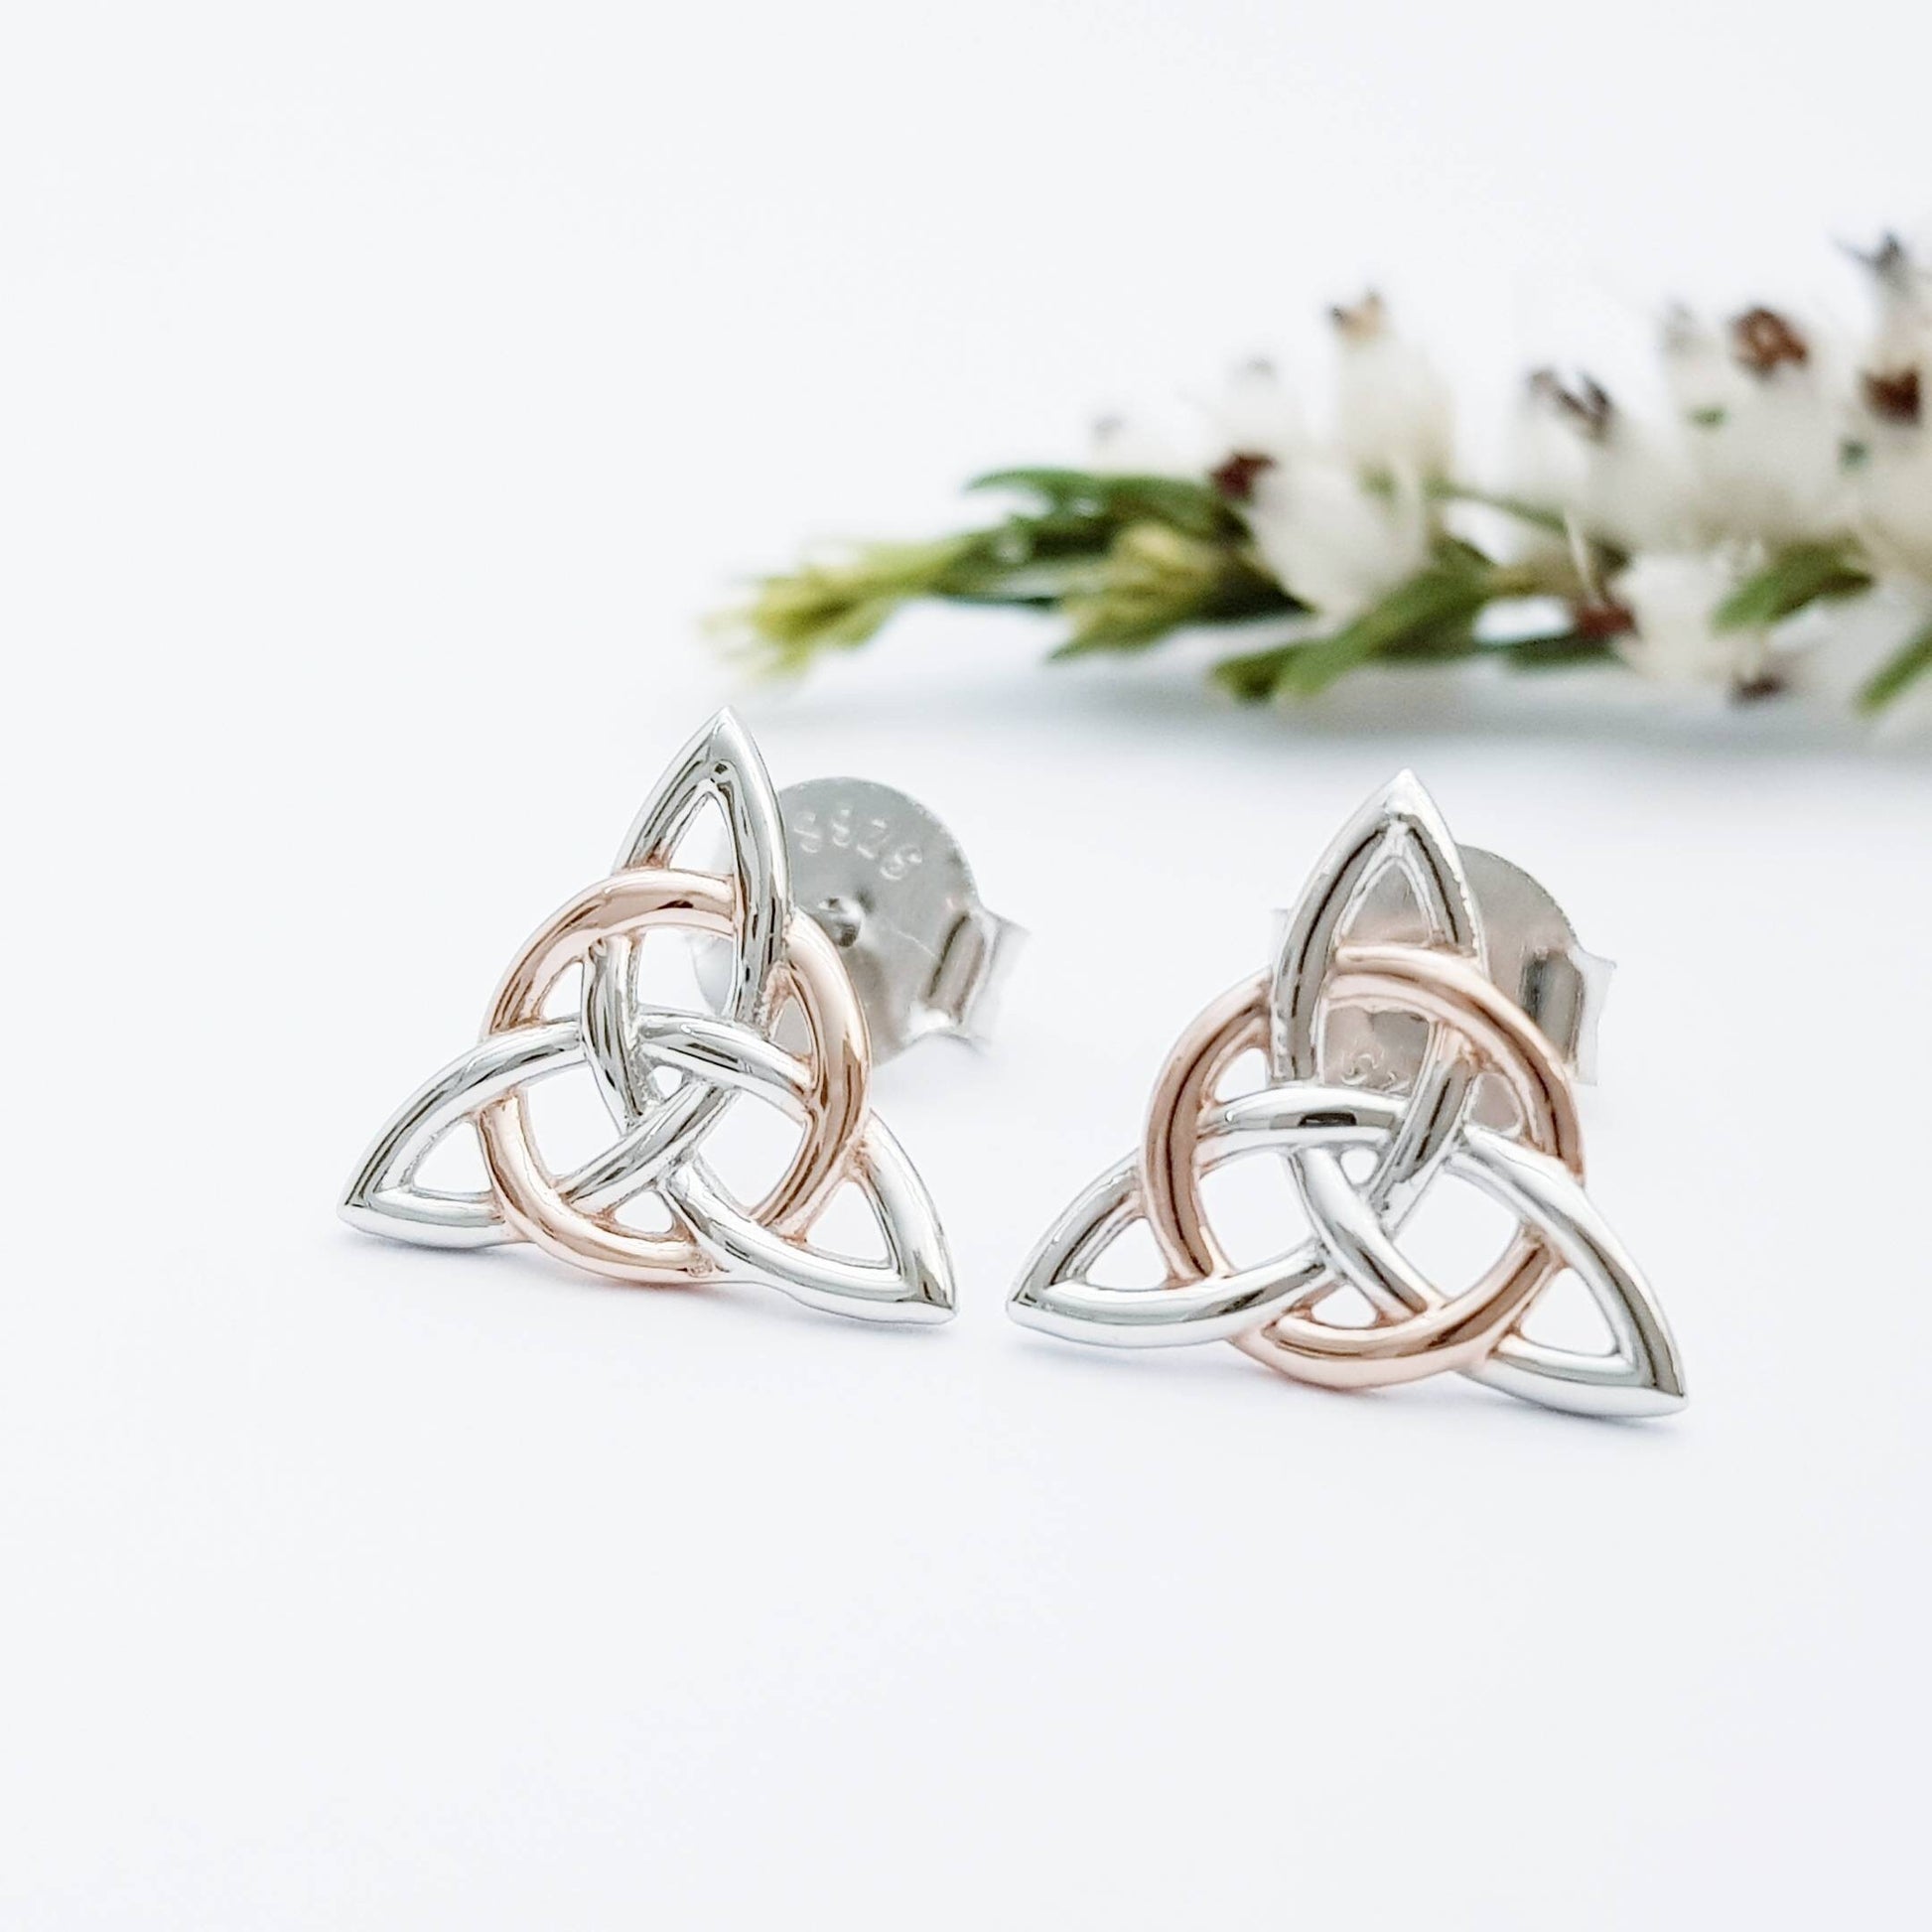 Celtic stud Earrings in silver with rose gold plating, triquetra earrings